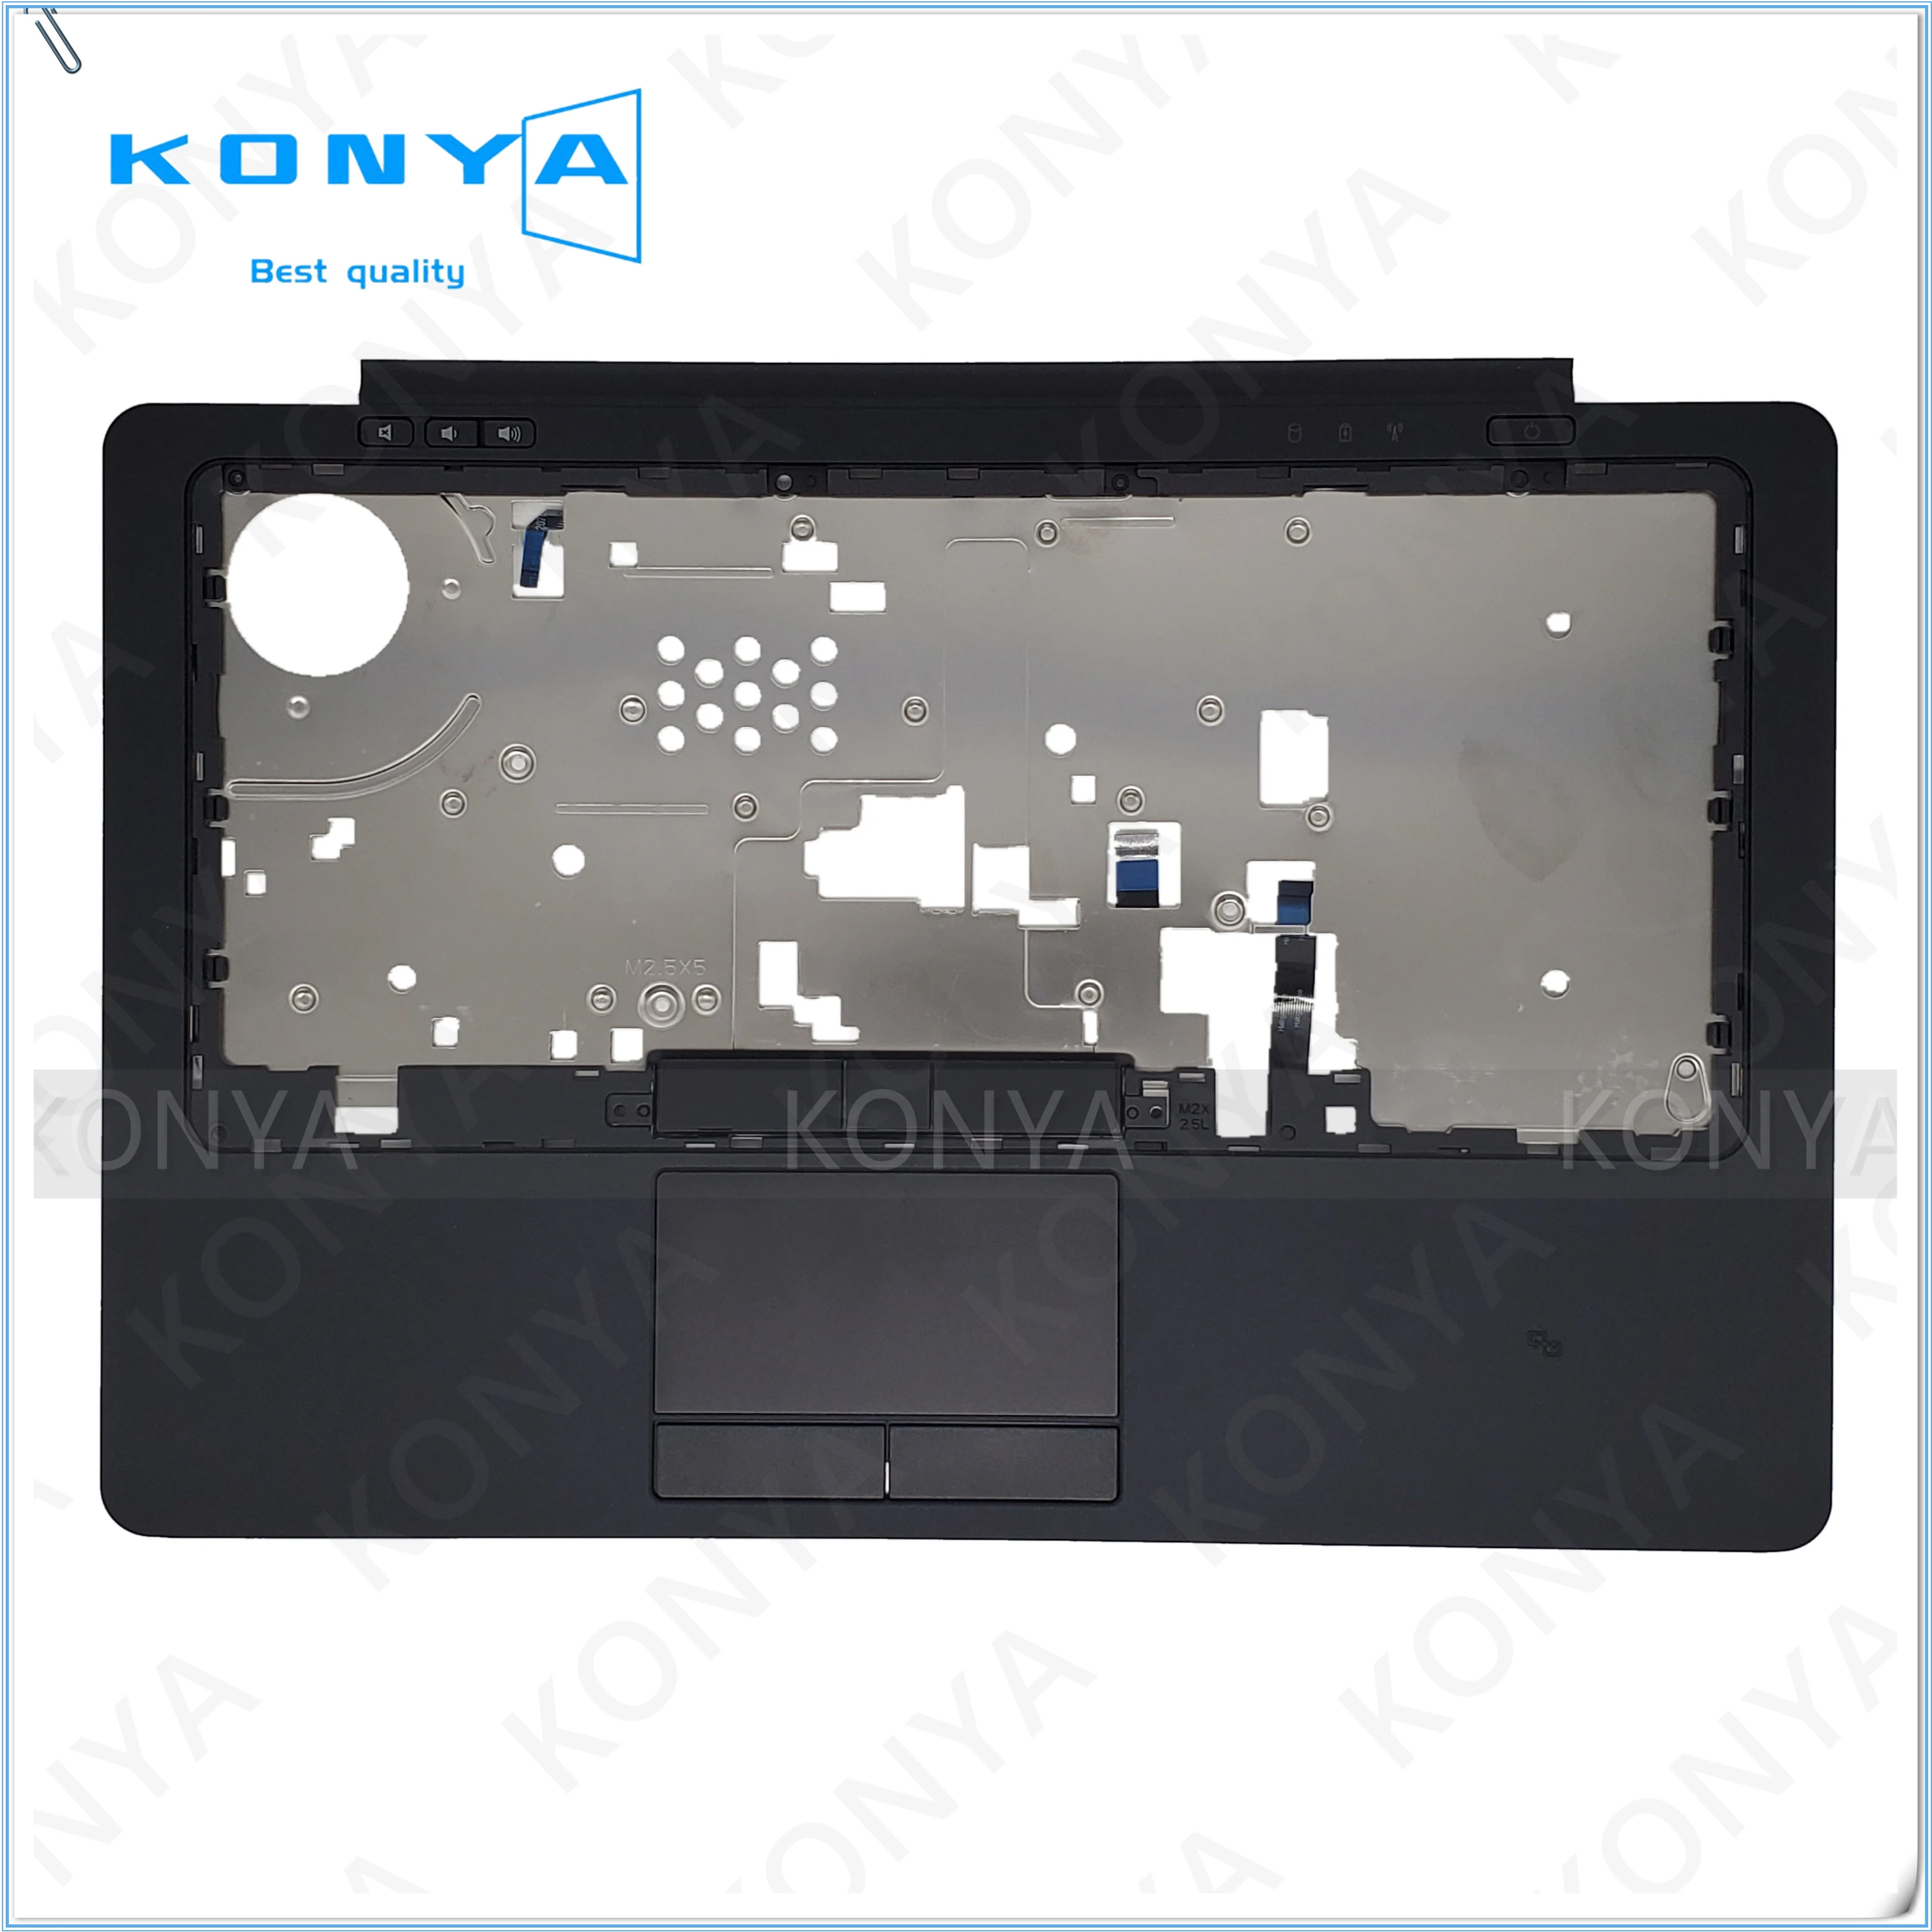 

New Original For Dell Latitude E7440 Top Cover Touchpad Palmrest Upper Case 1J5MY 01J5MY AP0VN000510